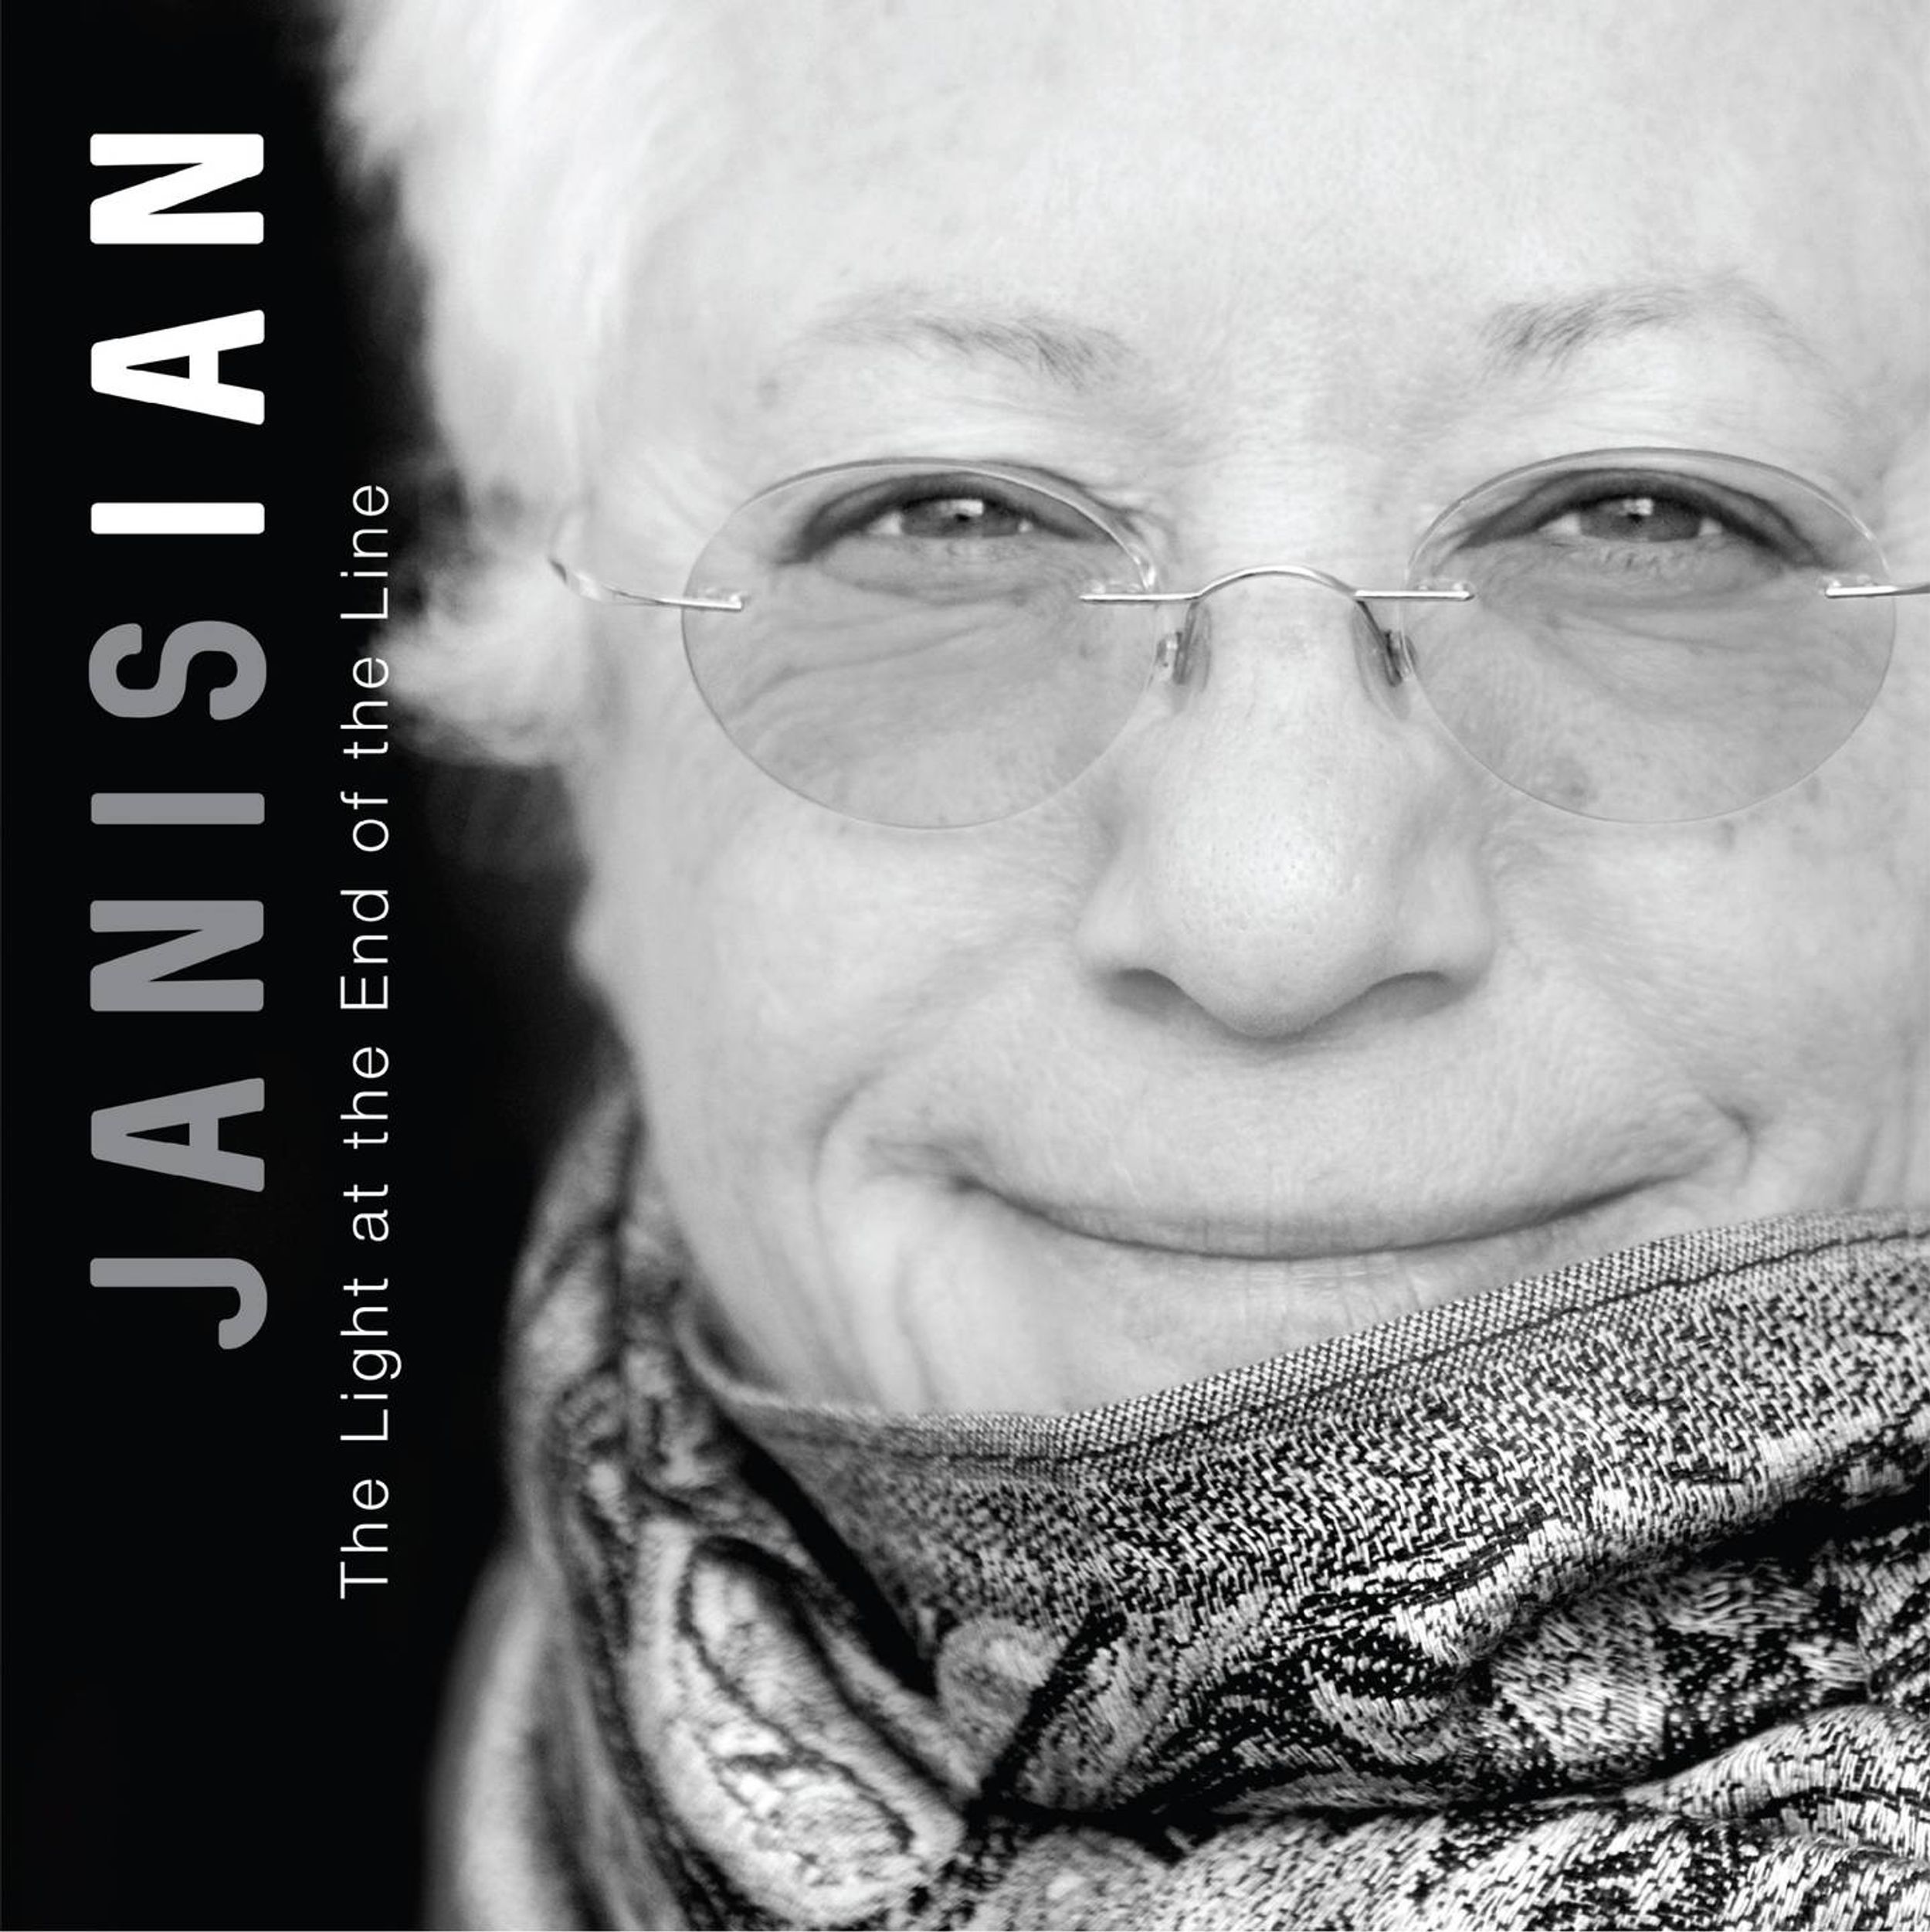 Album cover of "The Light At The End of The Line" by Janis Ian